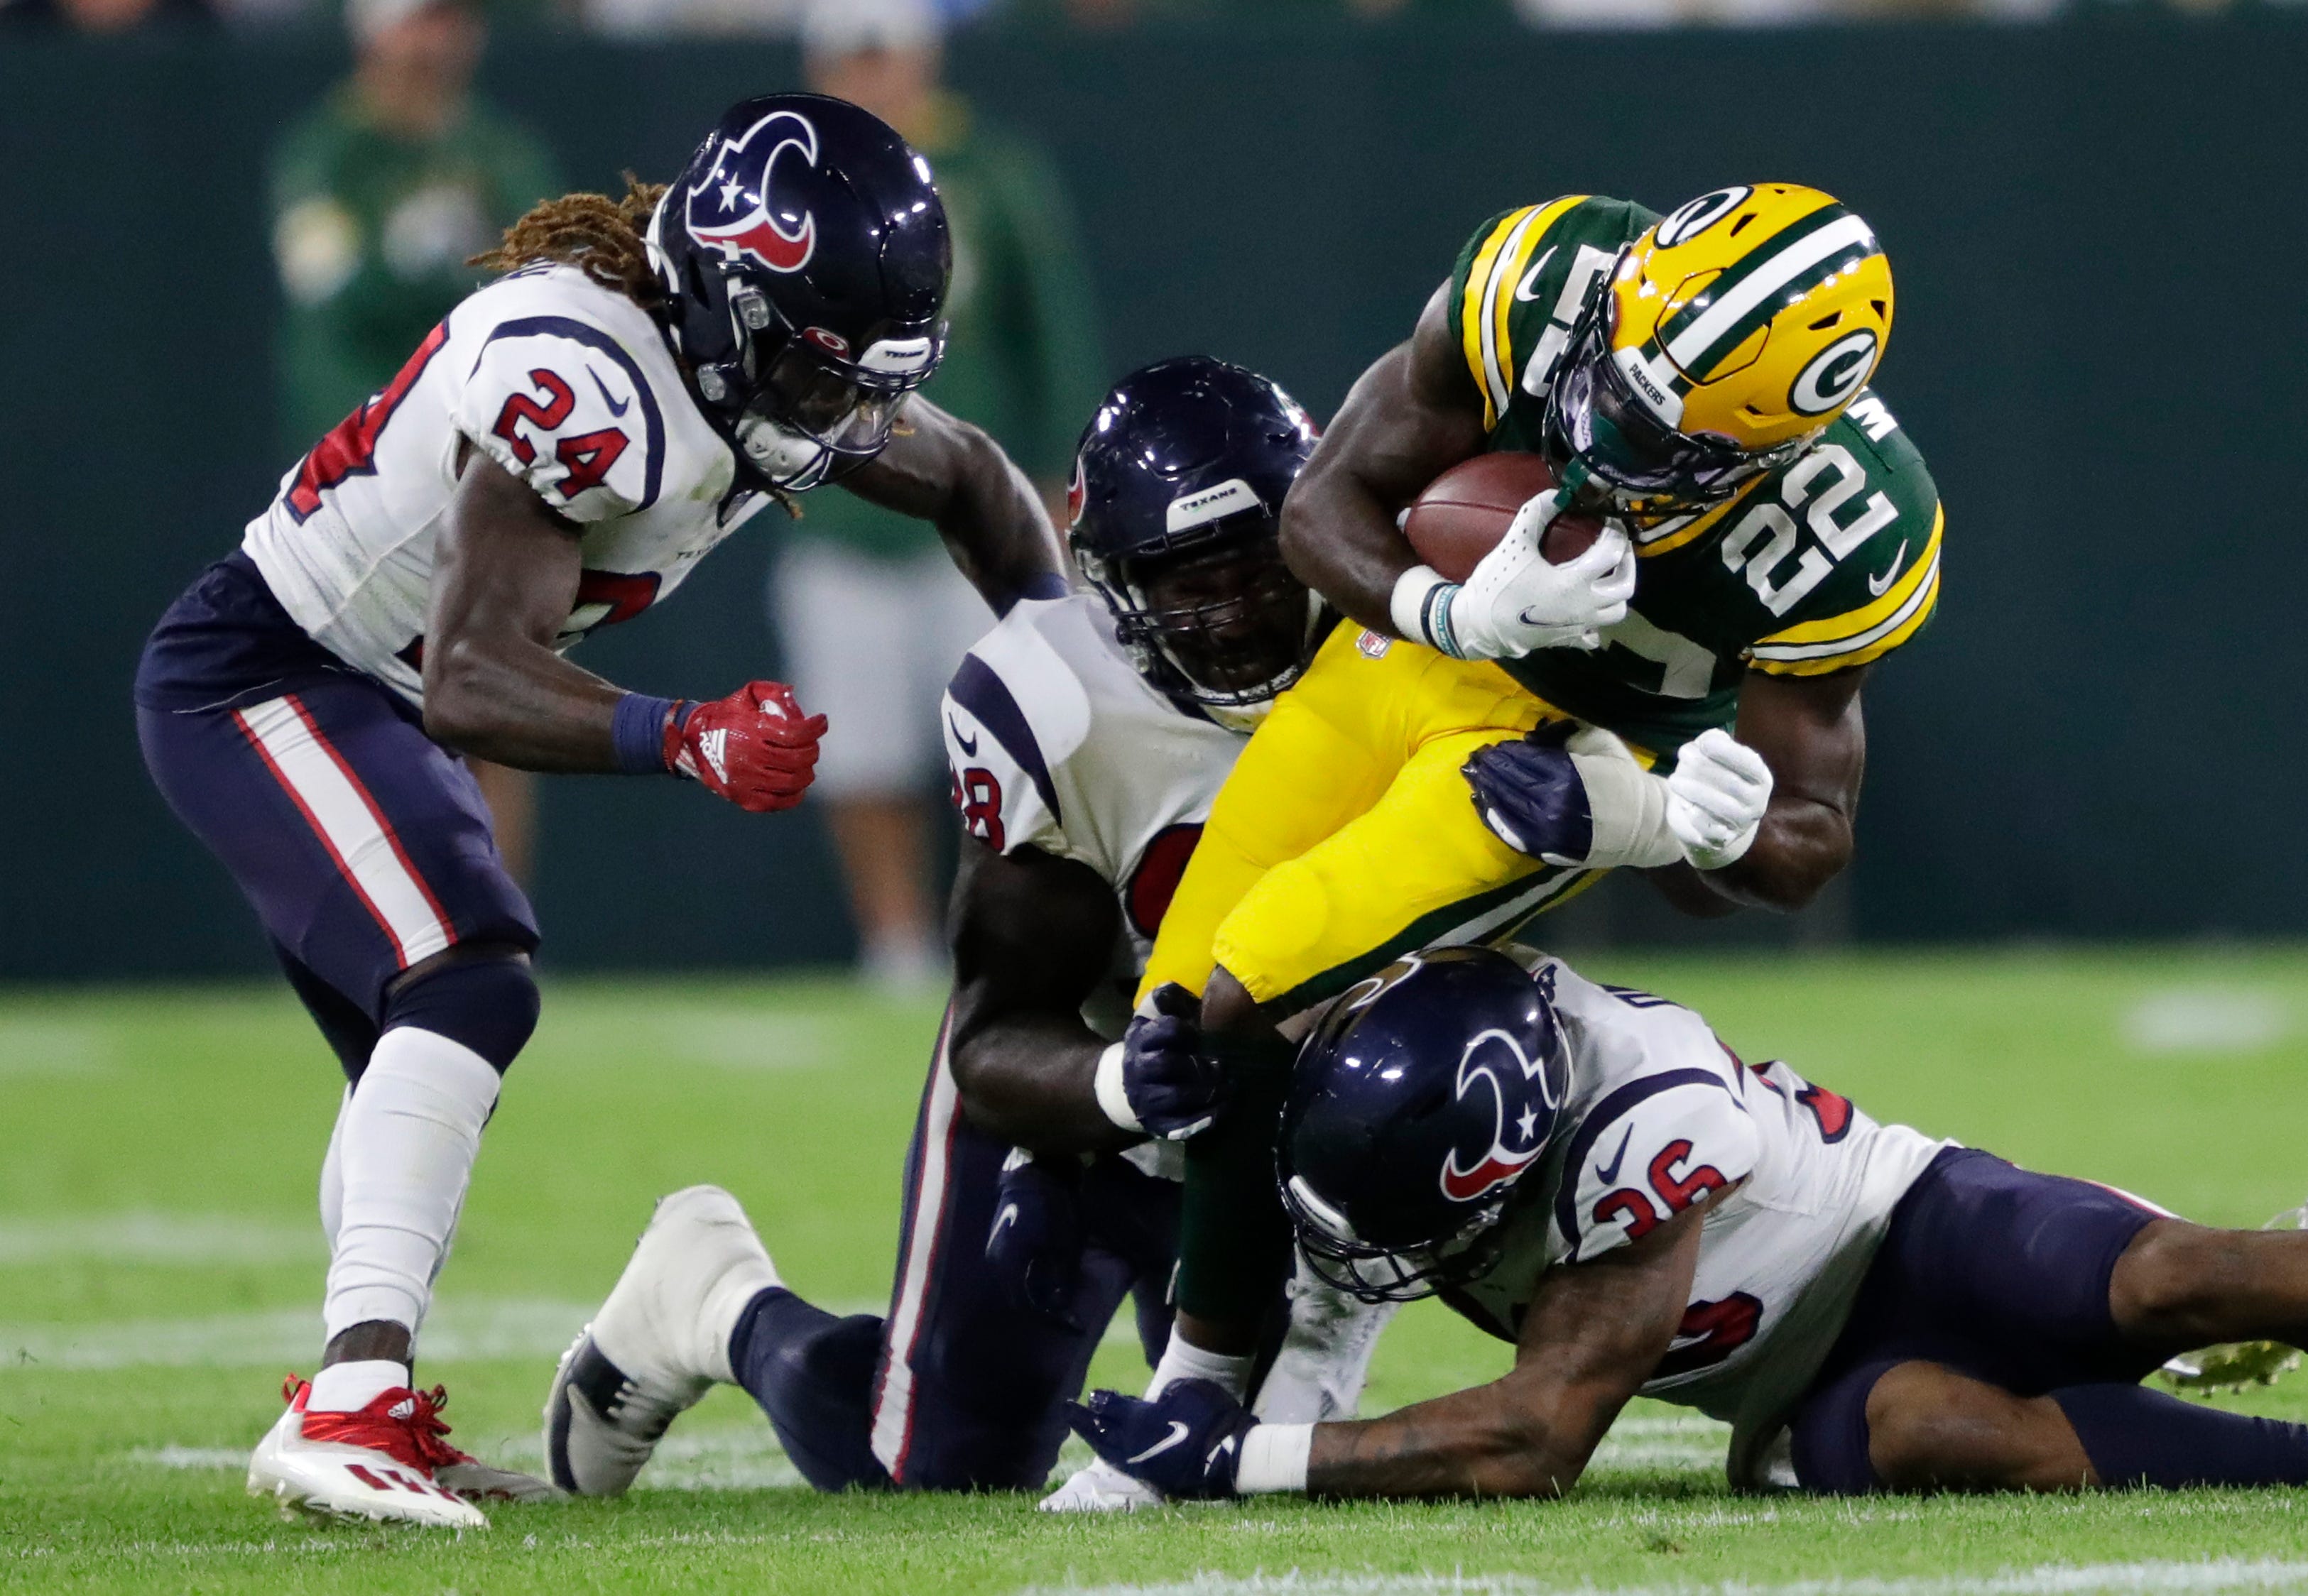 Green Bay Packers running back Dexter Williams (22) runs against Houston Texans cornerback Tremon Smith (24), defensive tackle Auzoyah Alufohai (98) and safety.Jonathan Owens (36) during their football game at Lambeau Field in Green Bay,